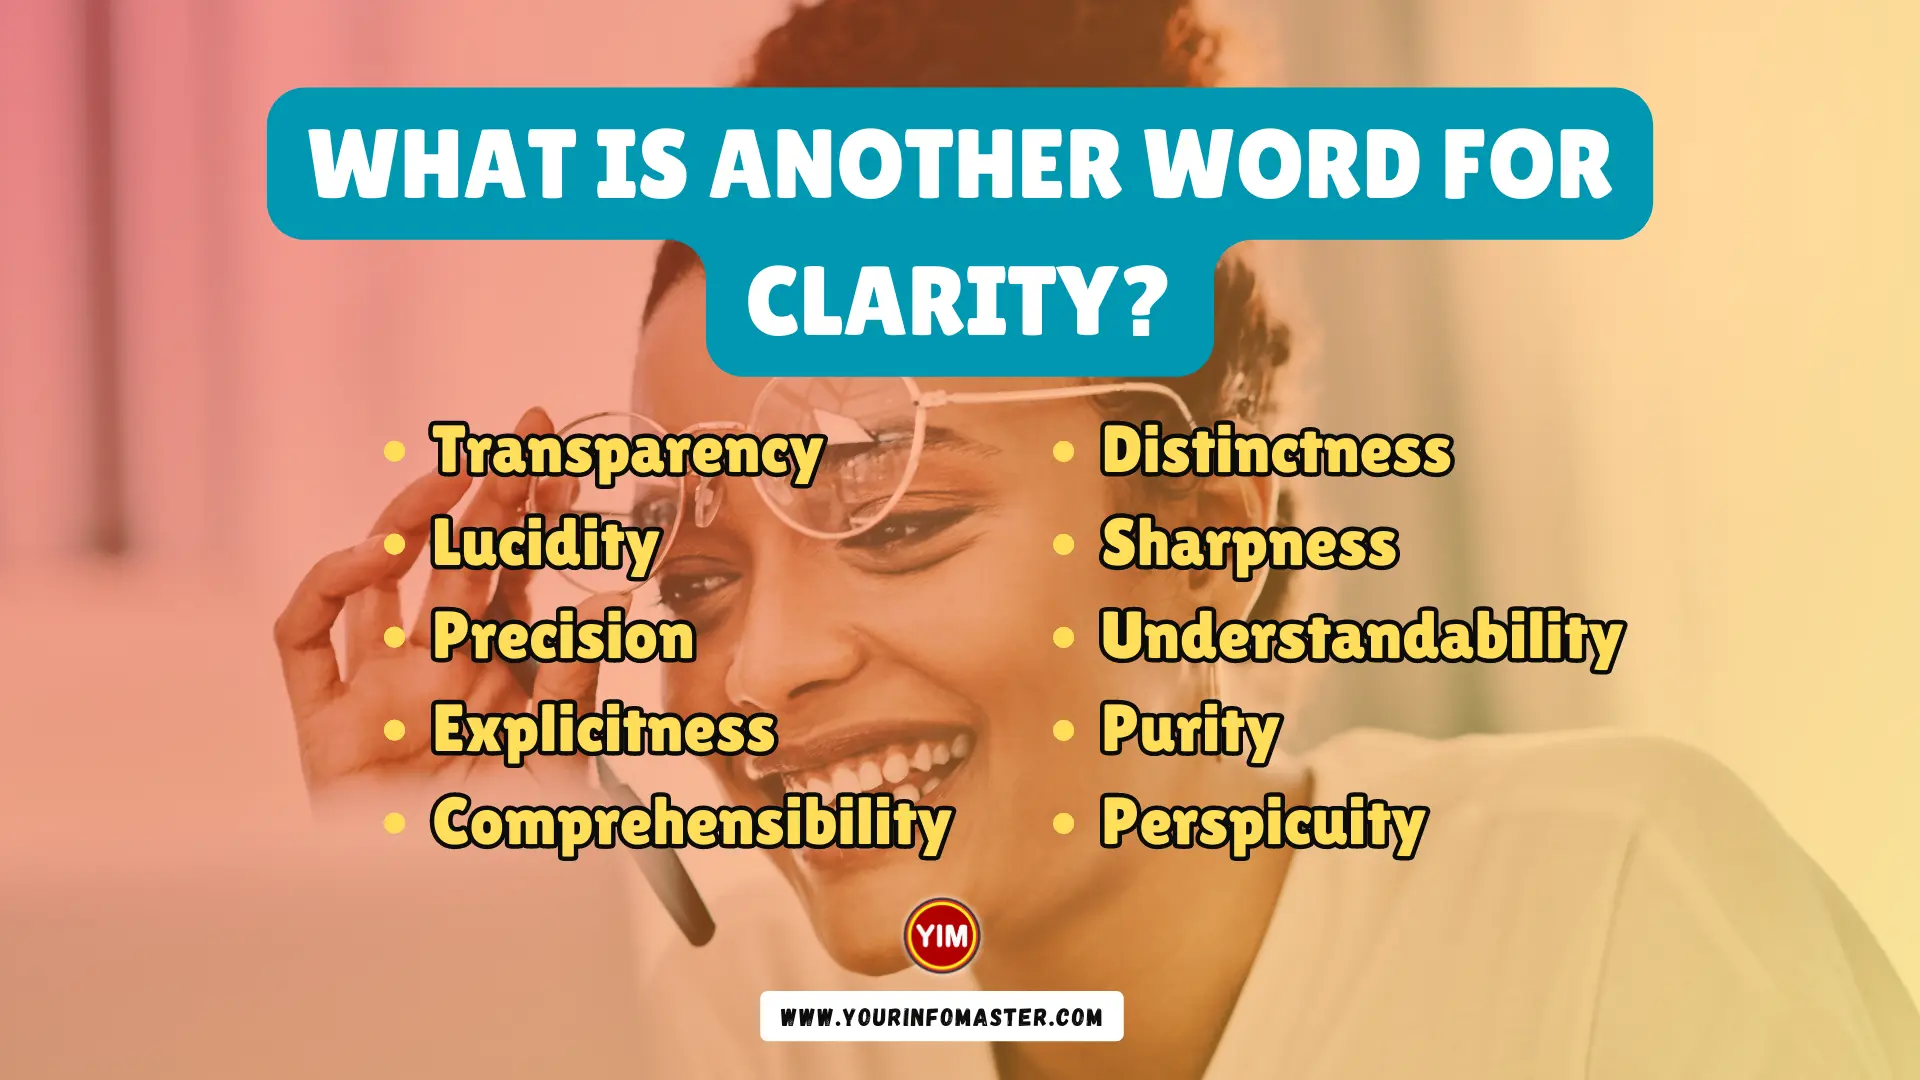 What is another word for Clarity